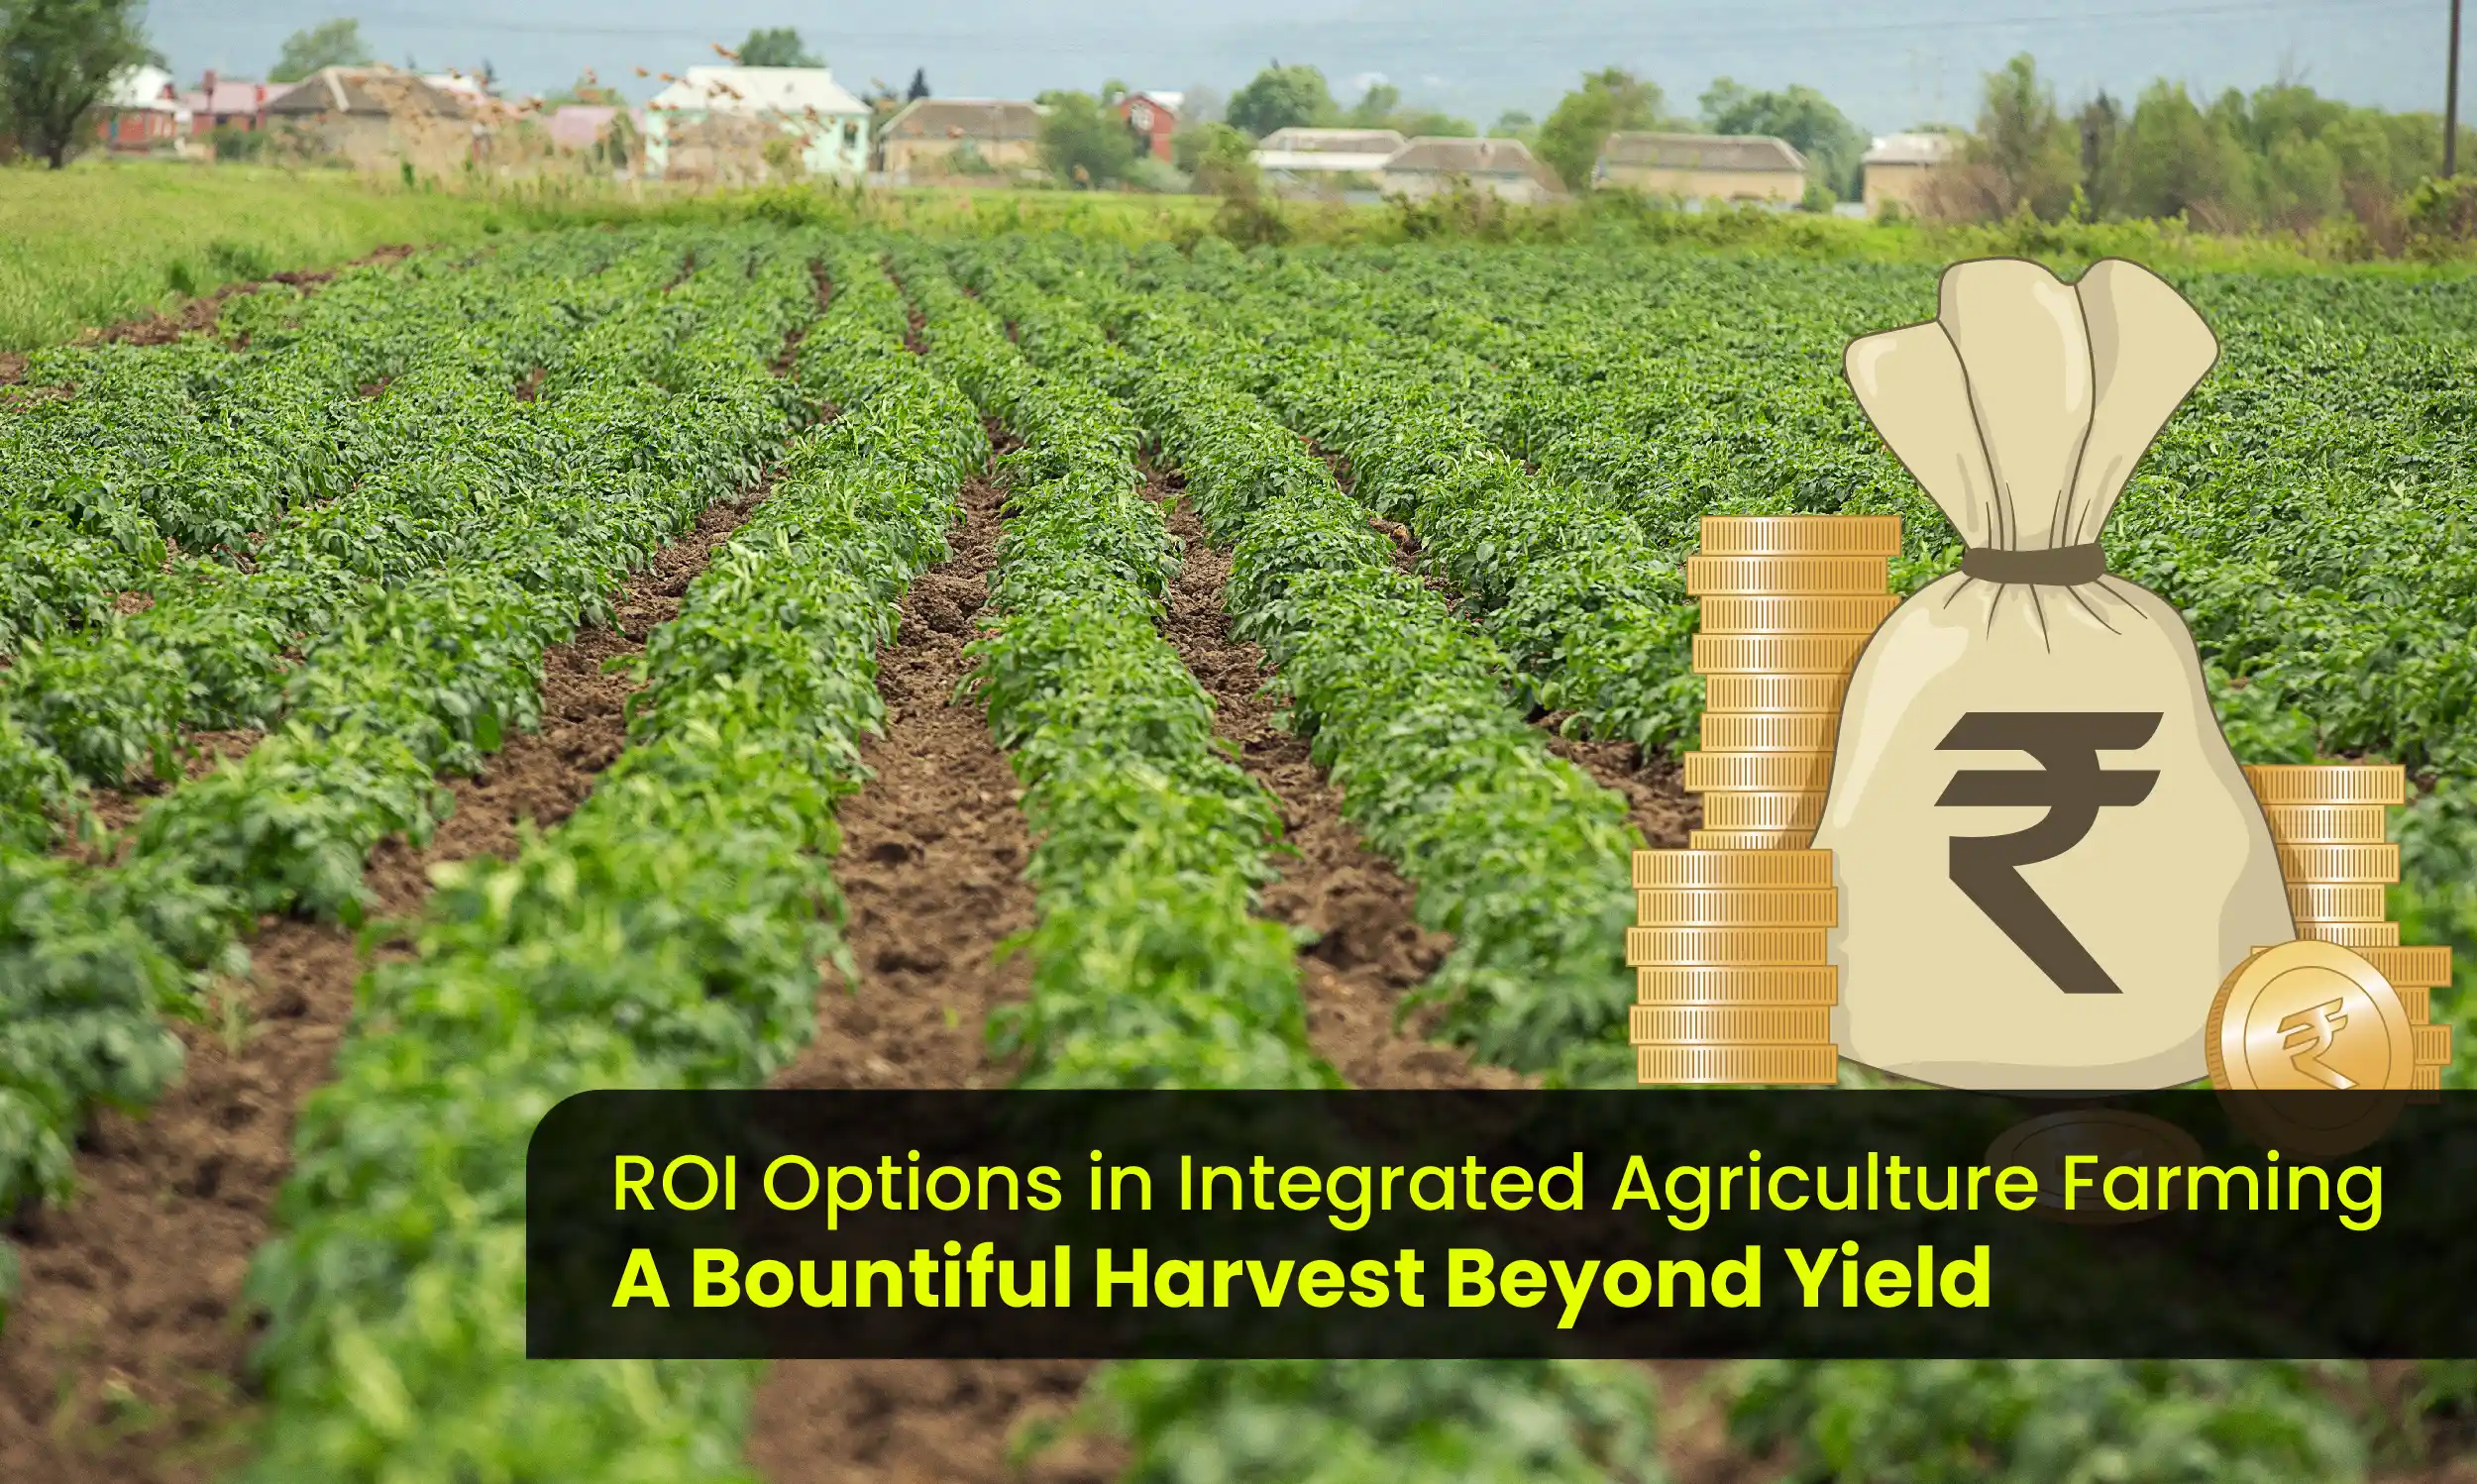 ROI Options in Integrated Agriculture Farming: A Bountiful Harvest Beyond Yield